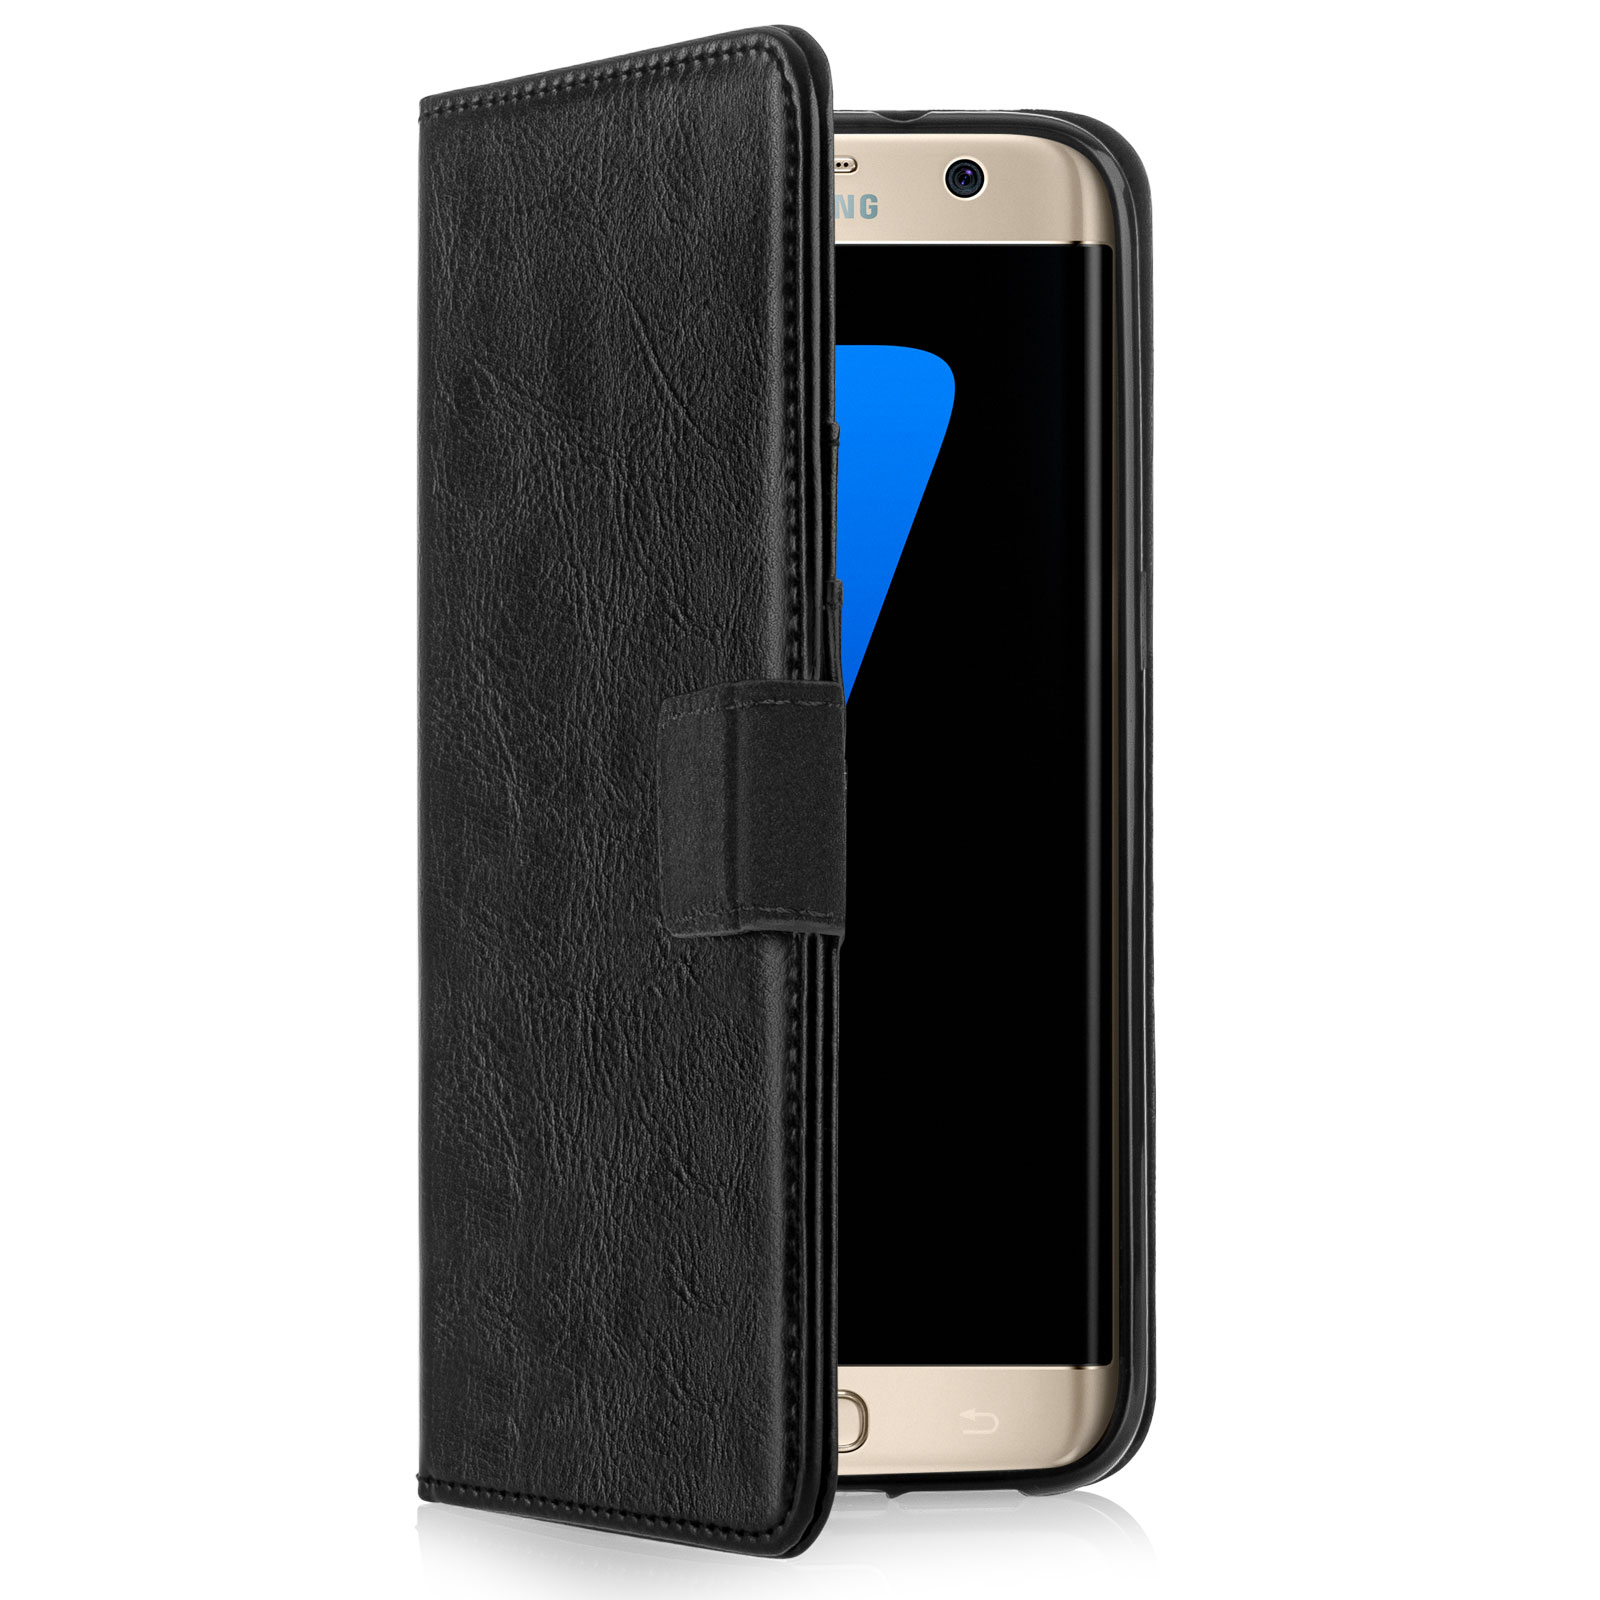 YouSave Accessories Samsung Galaxy S7 Edge Real Leather ID Wallet Case - Black 